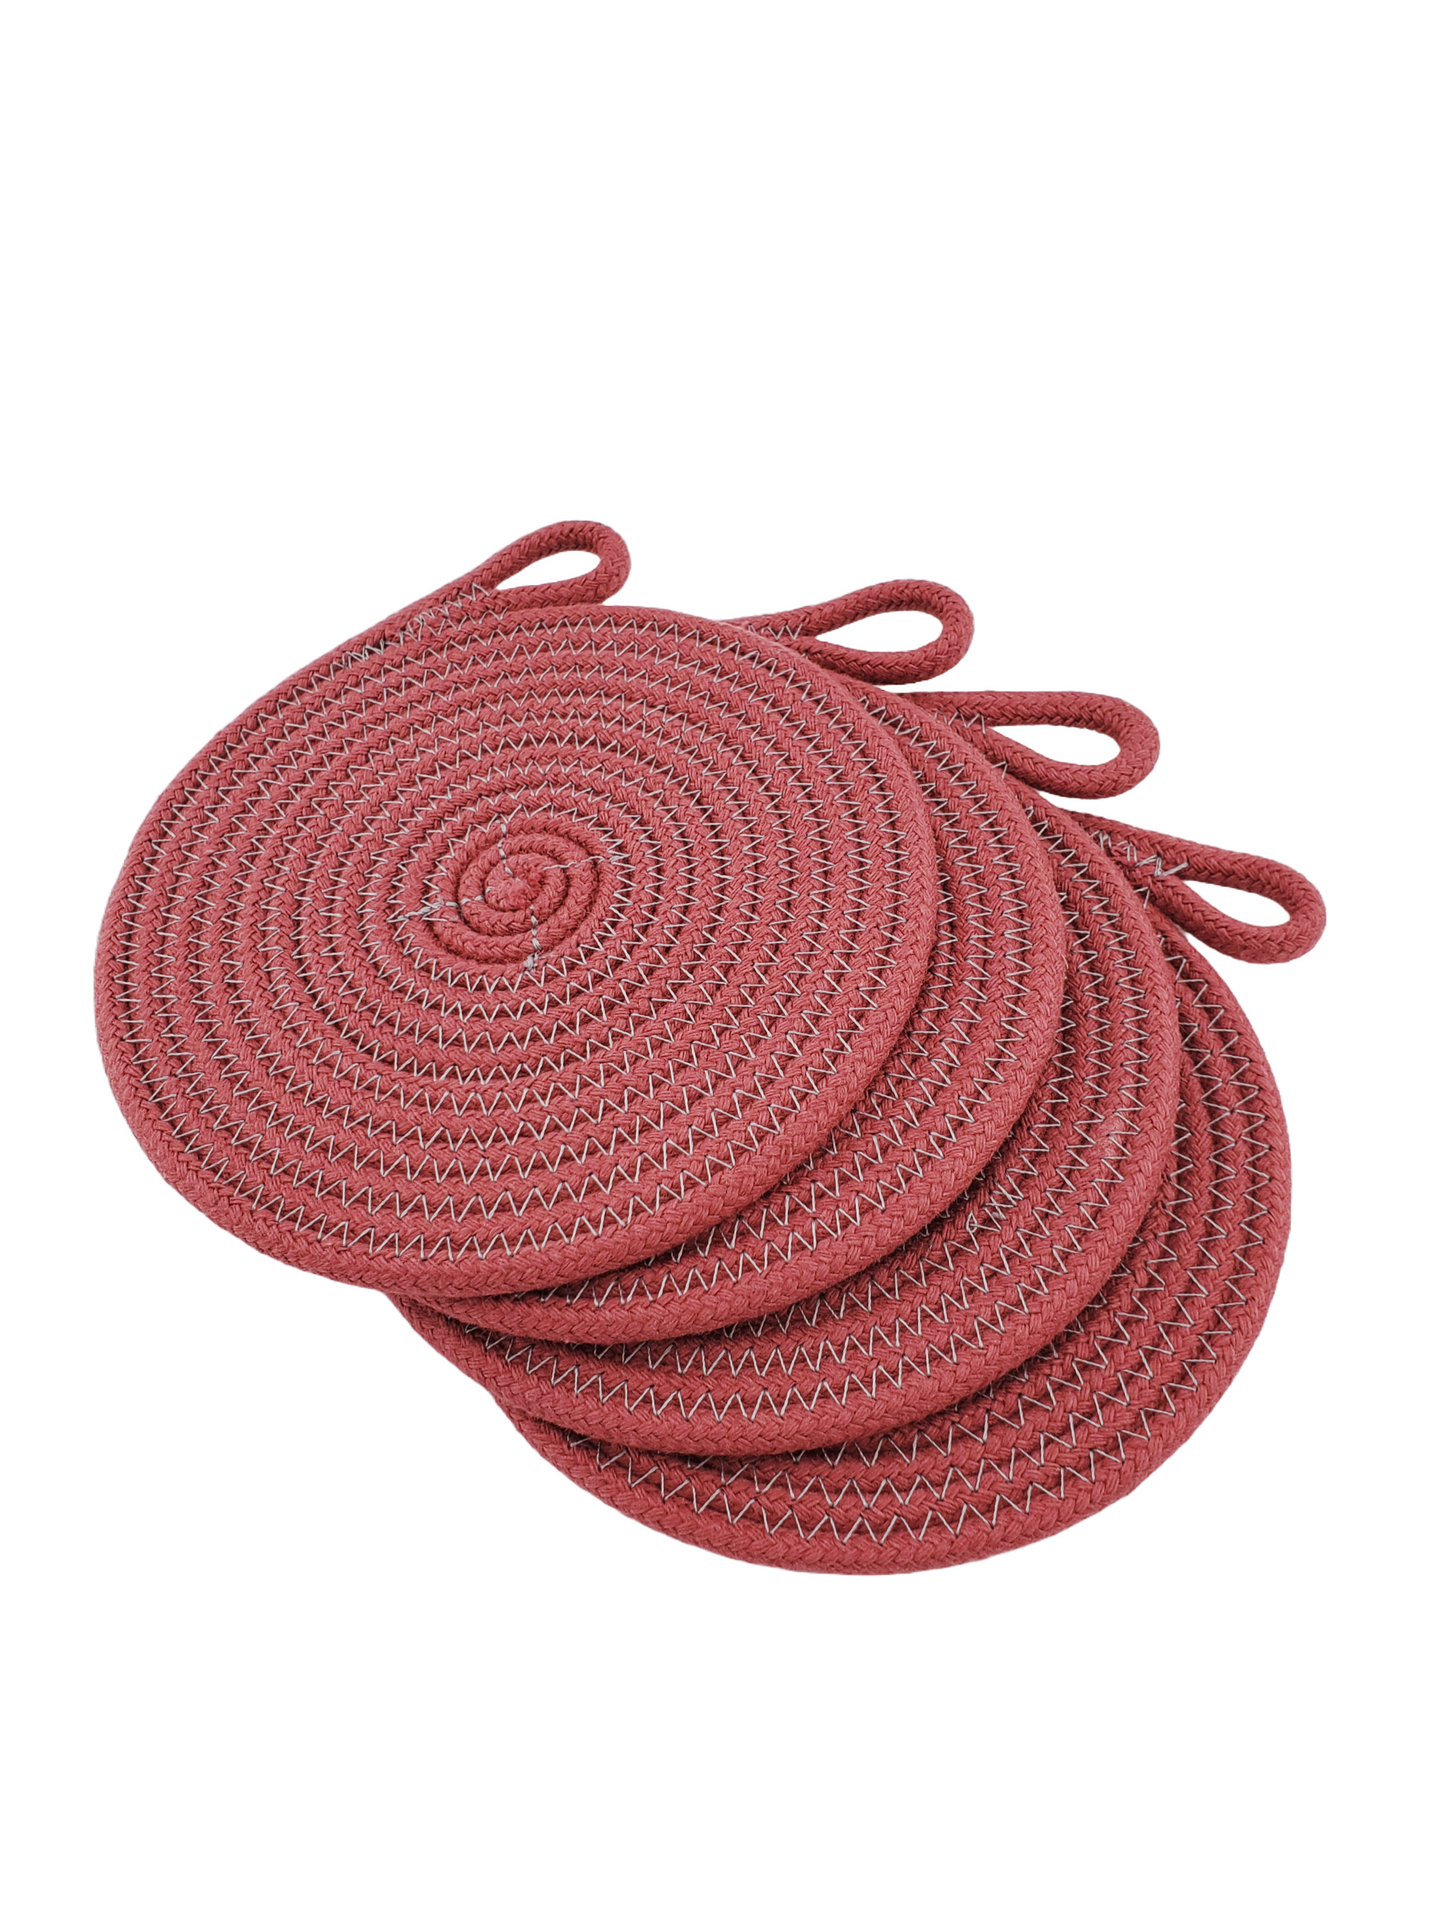 Red Coasters 4PC